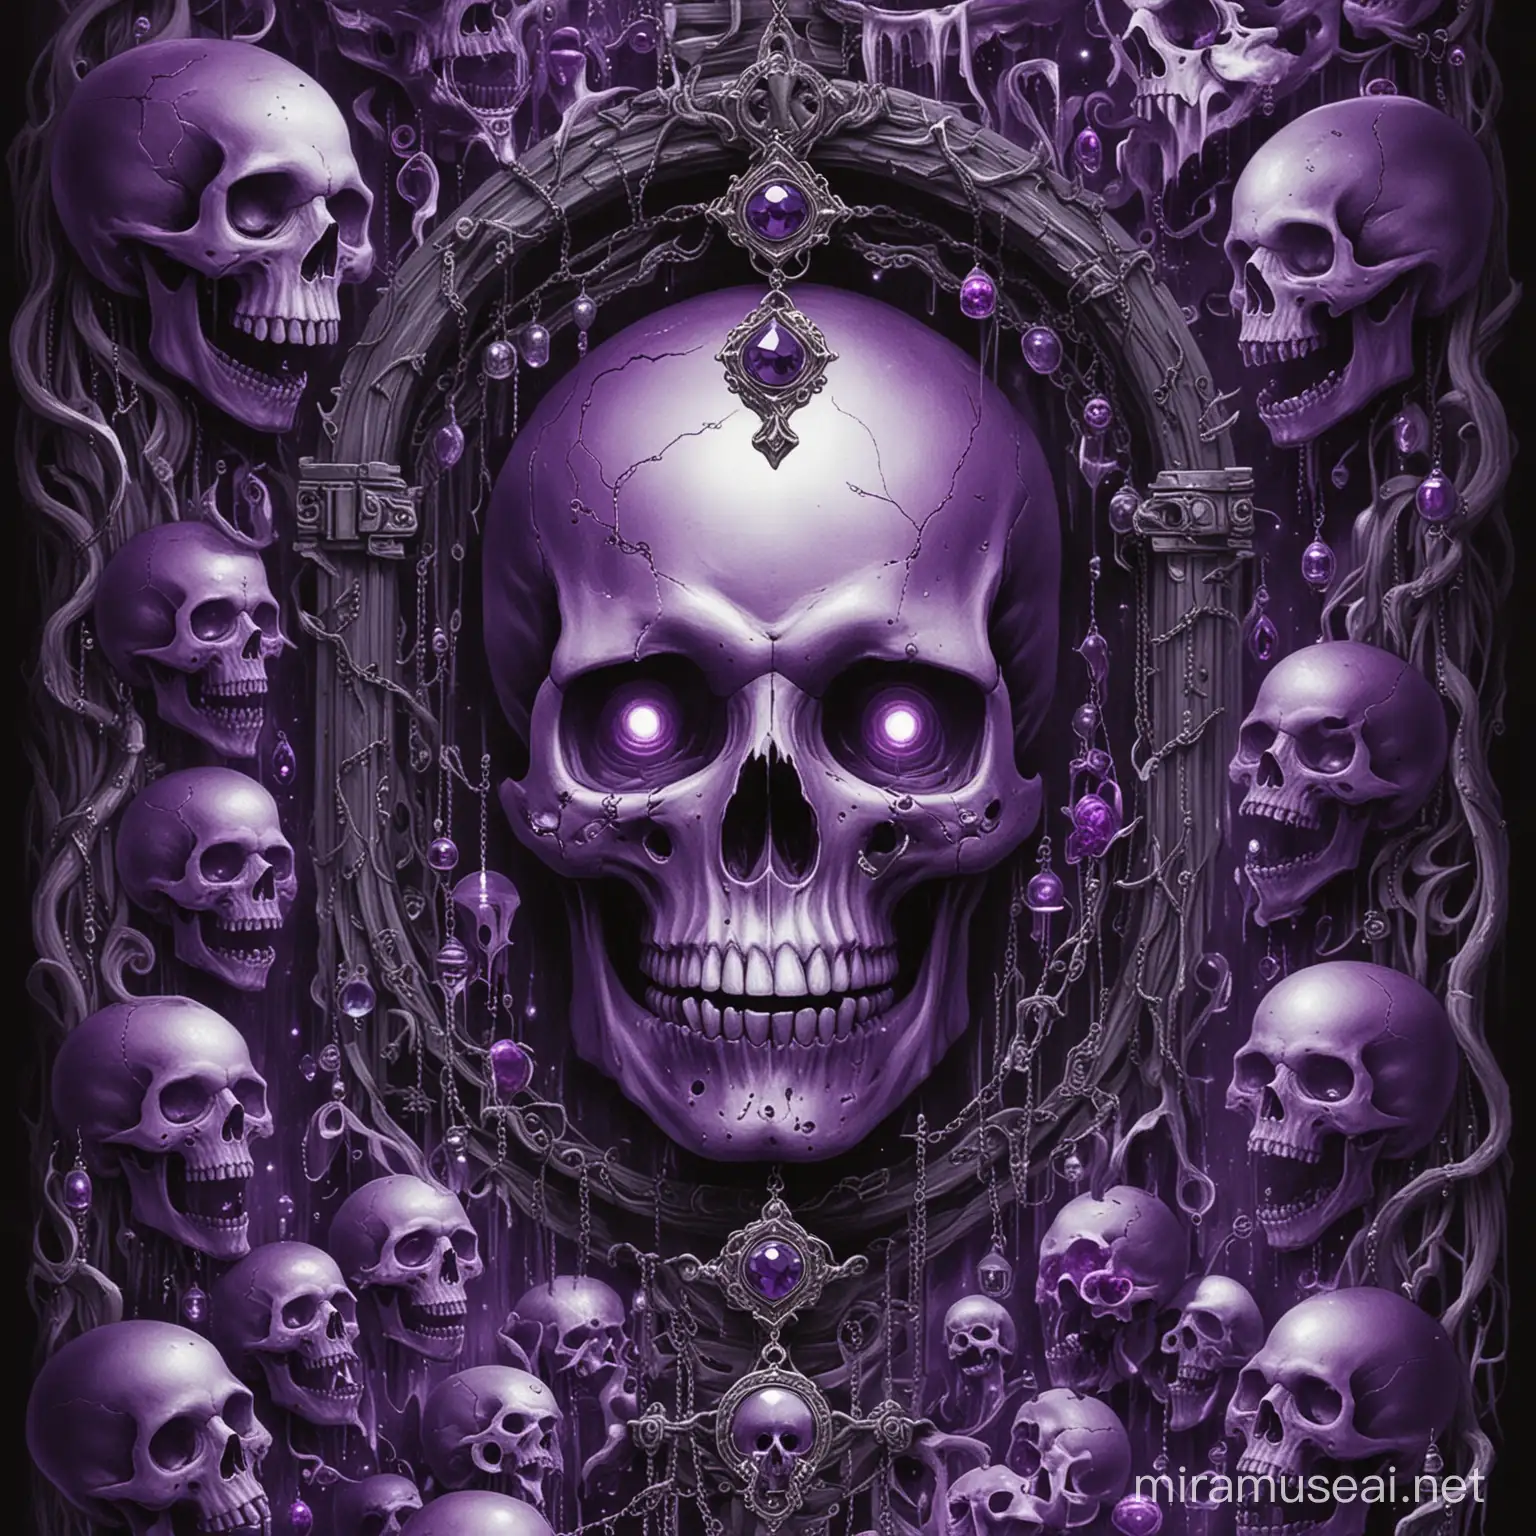 skulls, cursed amulet, horror movie, purple jewels, spirits, scary, ghosts, demons, movie poster, anthology, 4 stories